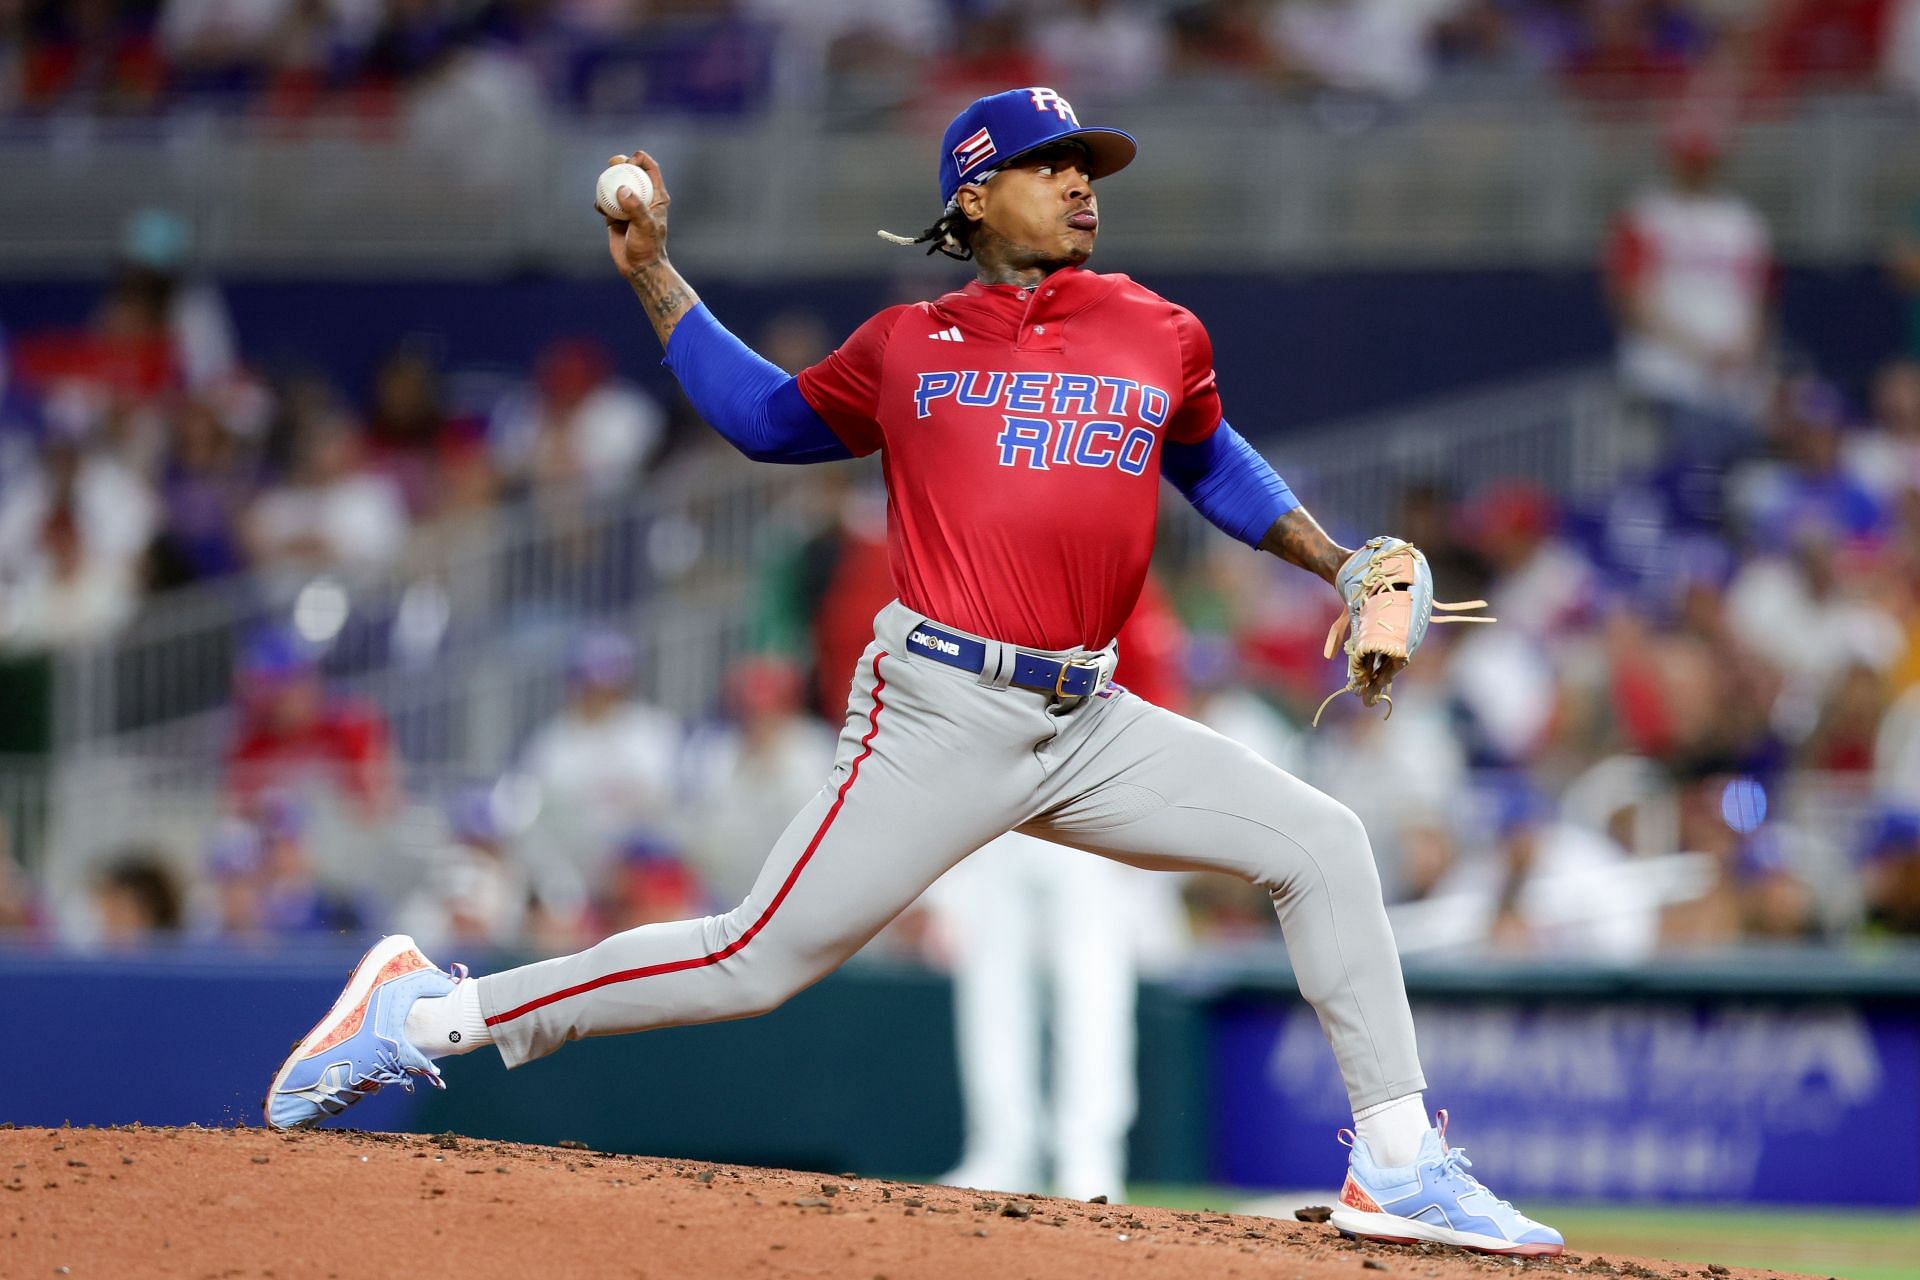 Marcus Stroman of Team Puerto Rico delivers a pitch against Team Mexico.